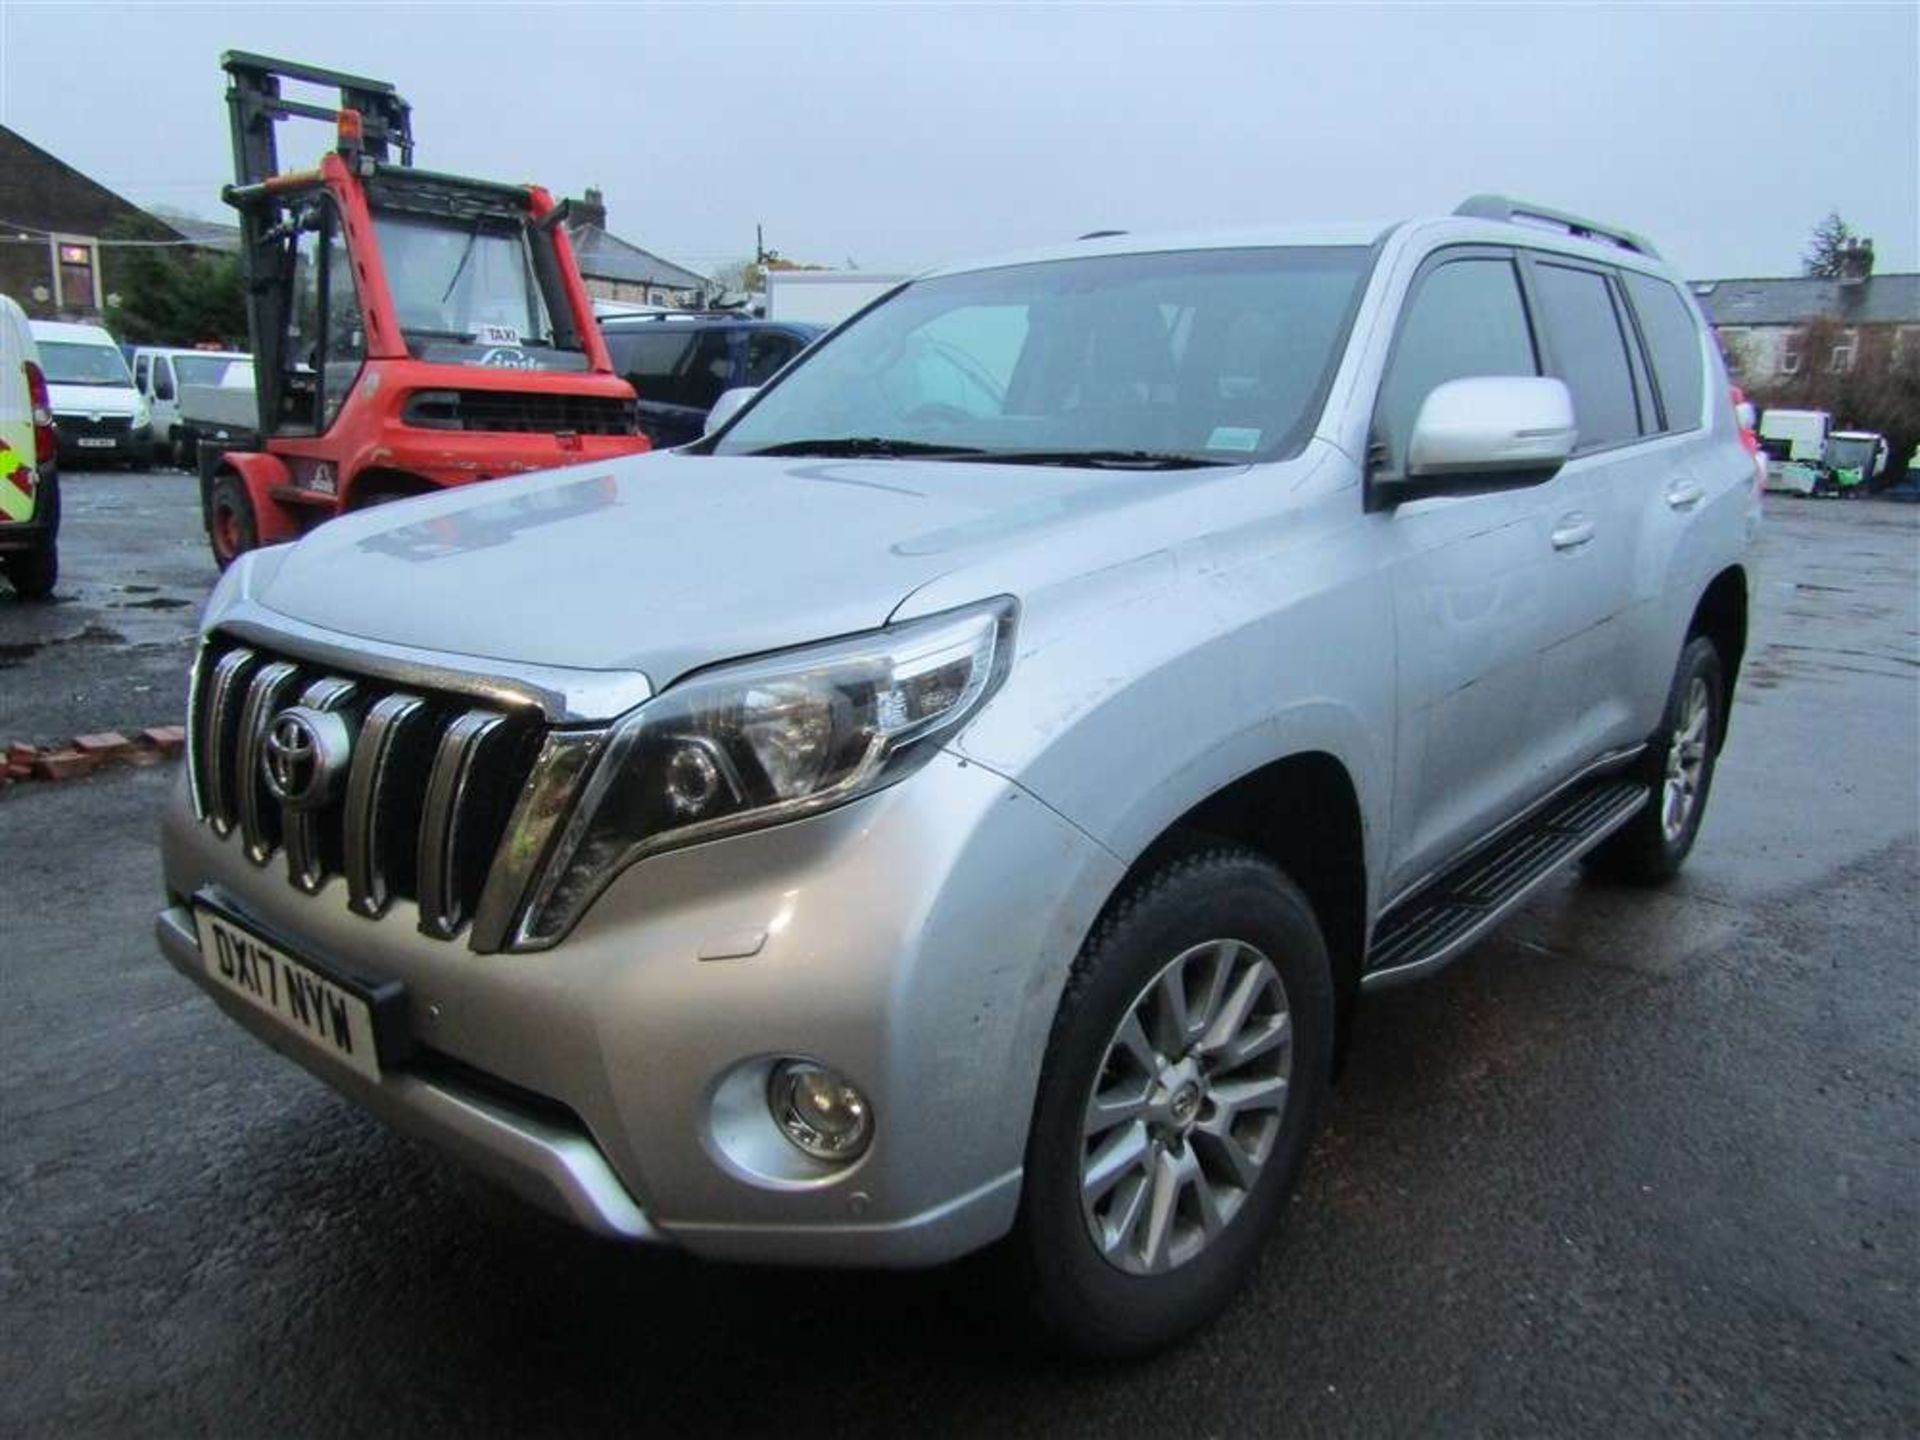 2017 17 reg Toyota Land Cruiser Icon D-4D Auto (Direct Council) - Image 2 of 6